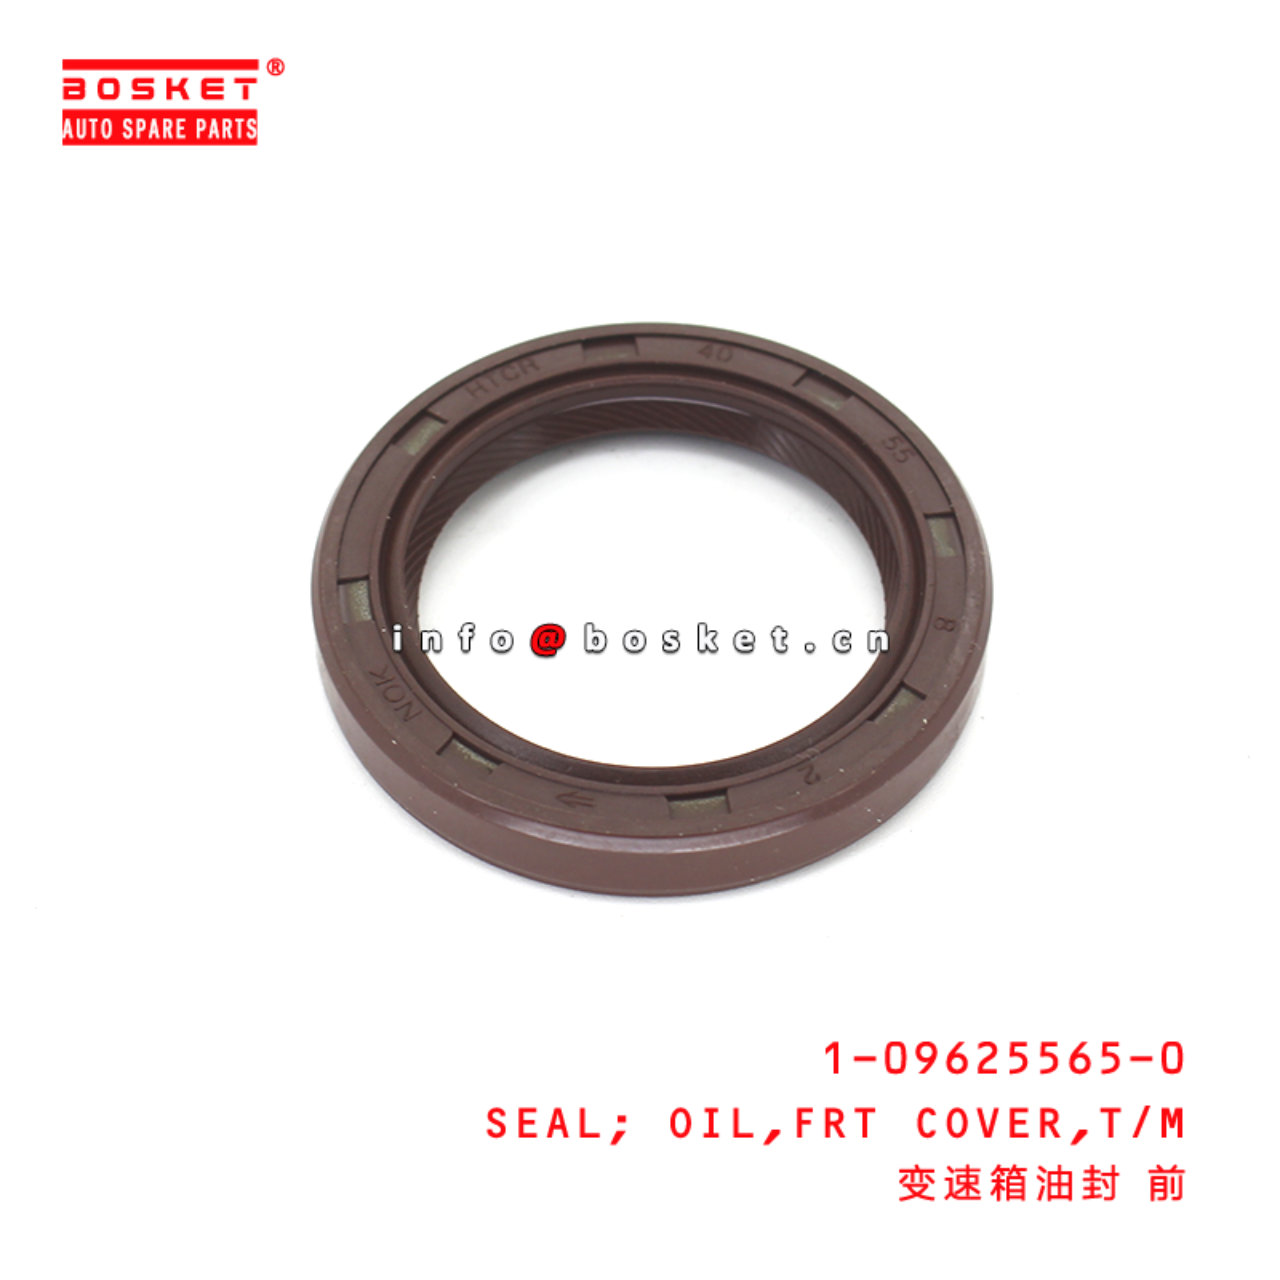 1-09625565-0 Transmission Rear Cover Oil Seal suitable for ISUZU FSR32 6HE1T 1096255650